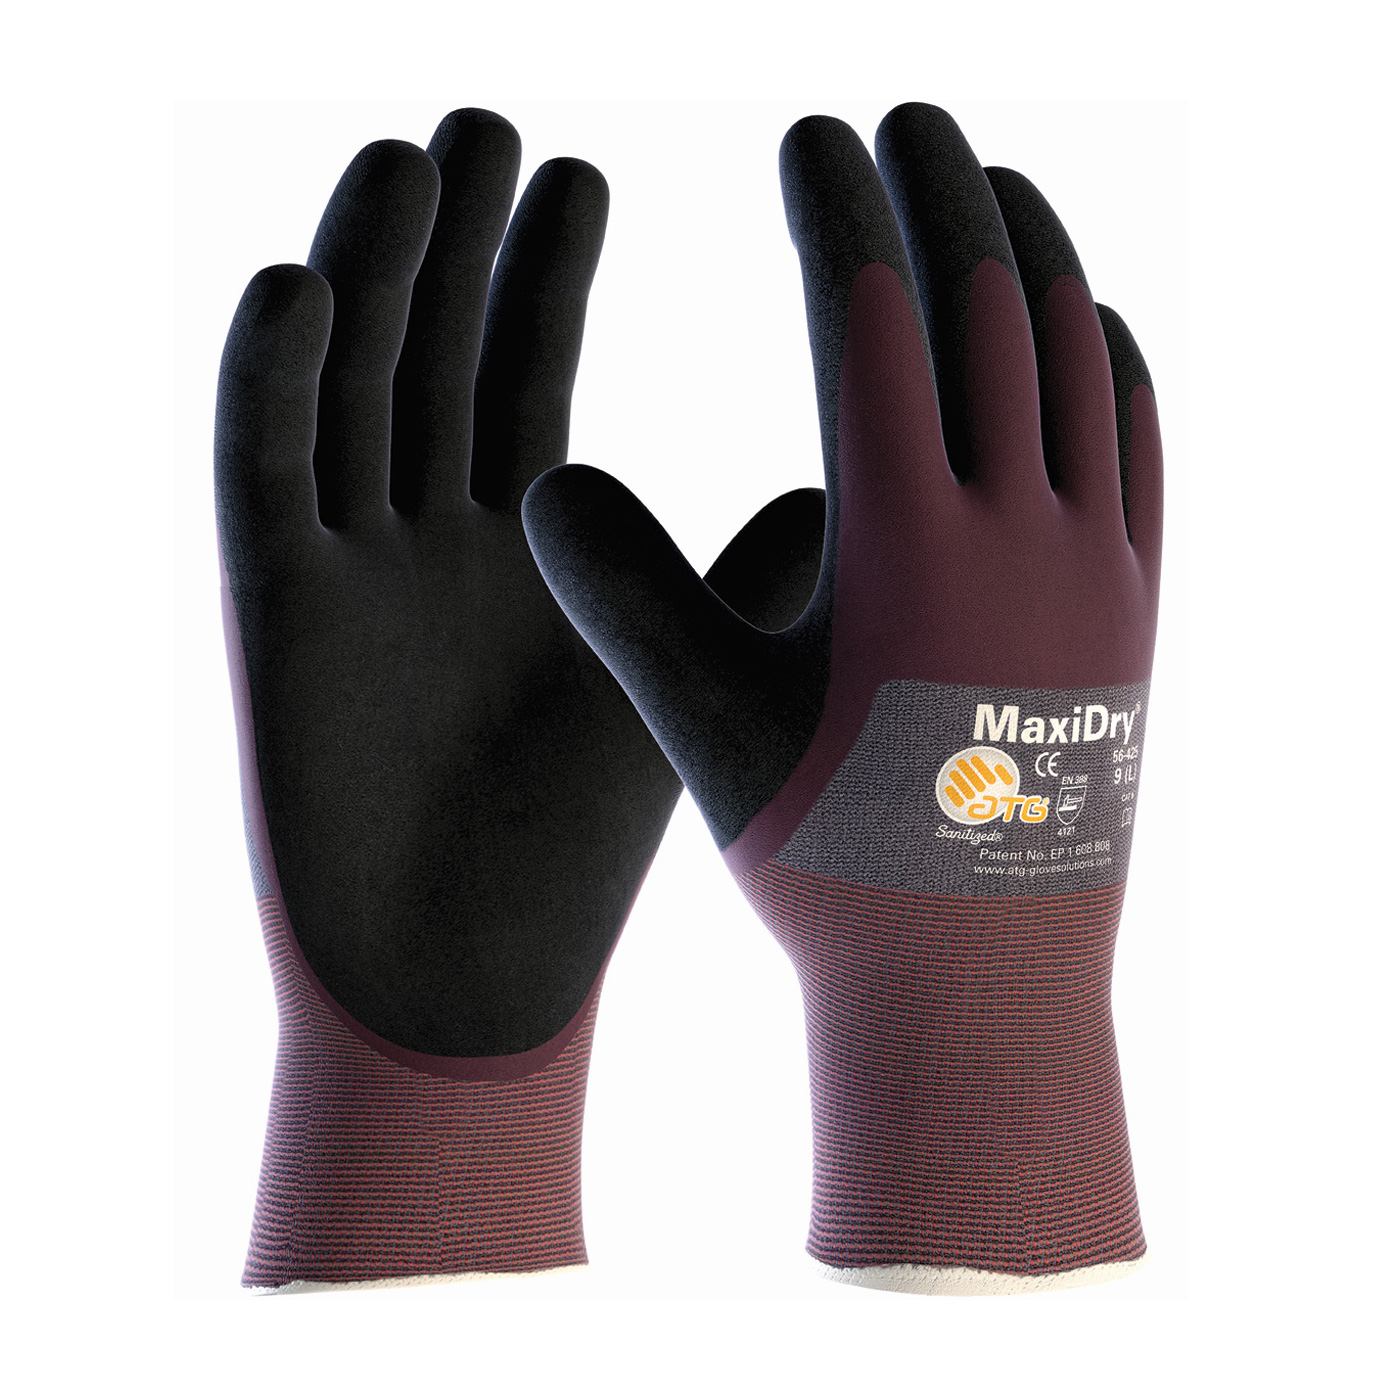 ULTRA LIGHTWEIGHT NITRILE GLOVE, 3/4 DIPPED WITH SEAMLESS KNIT NYLON / ELASTANE LINER AND NON-SLIP GRIP ON PALM & FINGERS